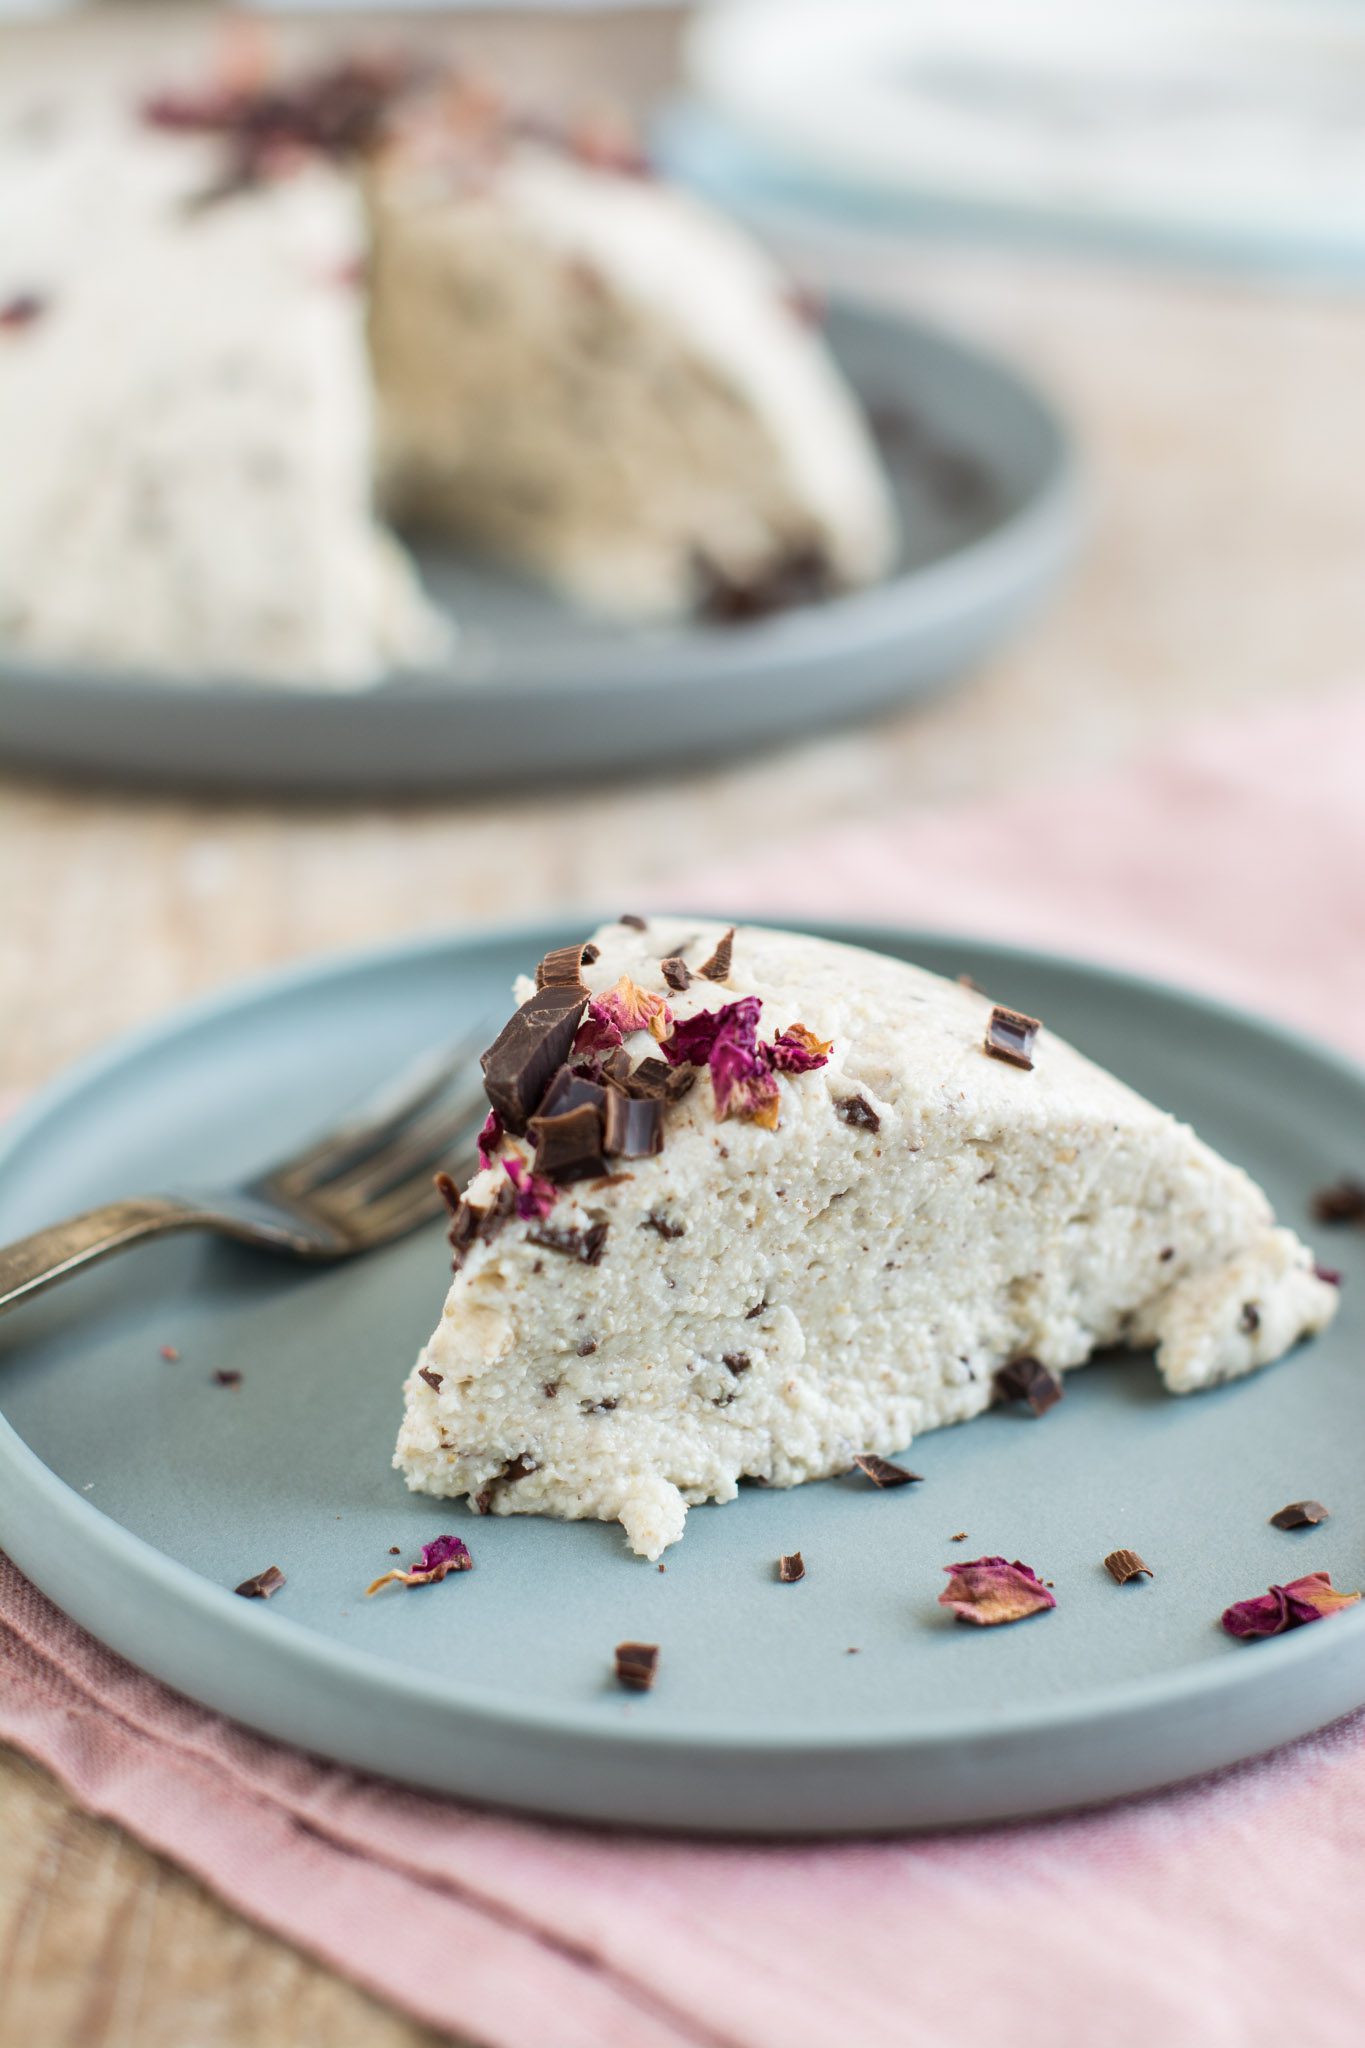 Learn how to make healthy dessert for Easter that is gluten-free and oil-free vegan cheesecake.